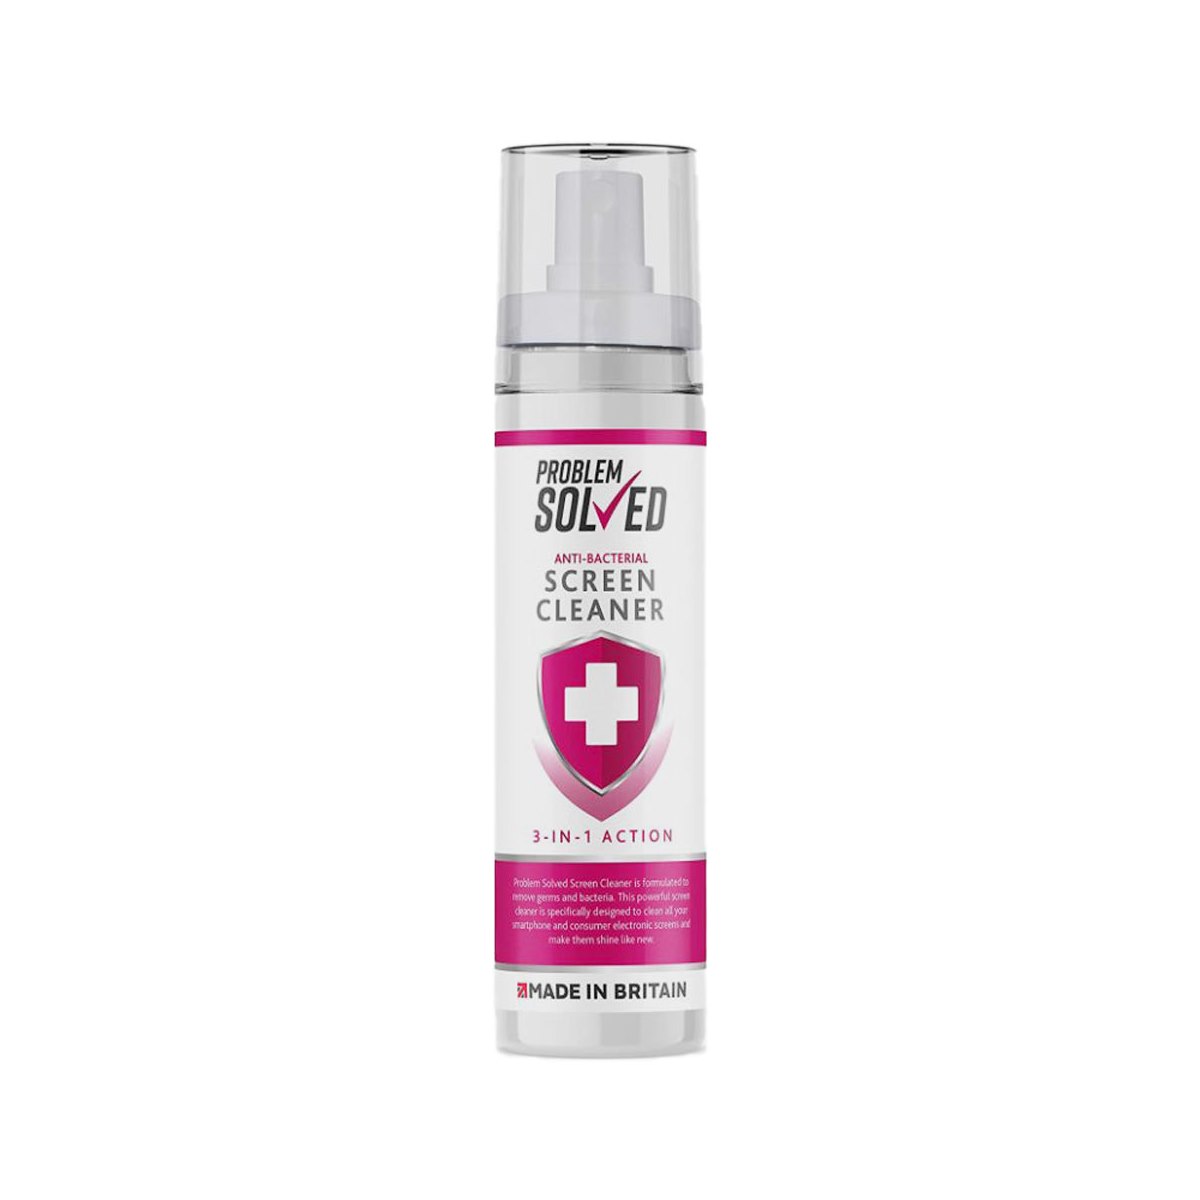 Problem Solved Anti-Bacterial Screen Cleaner 100ml